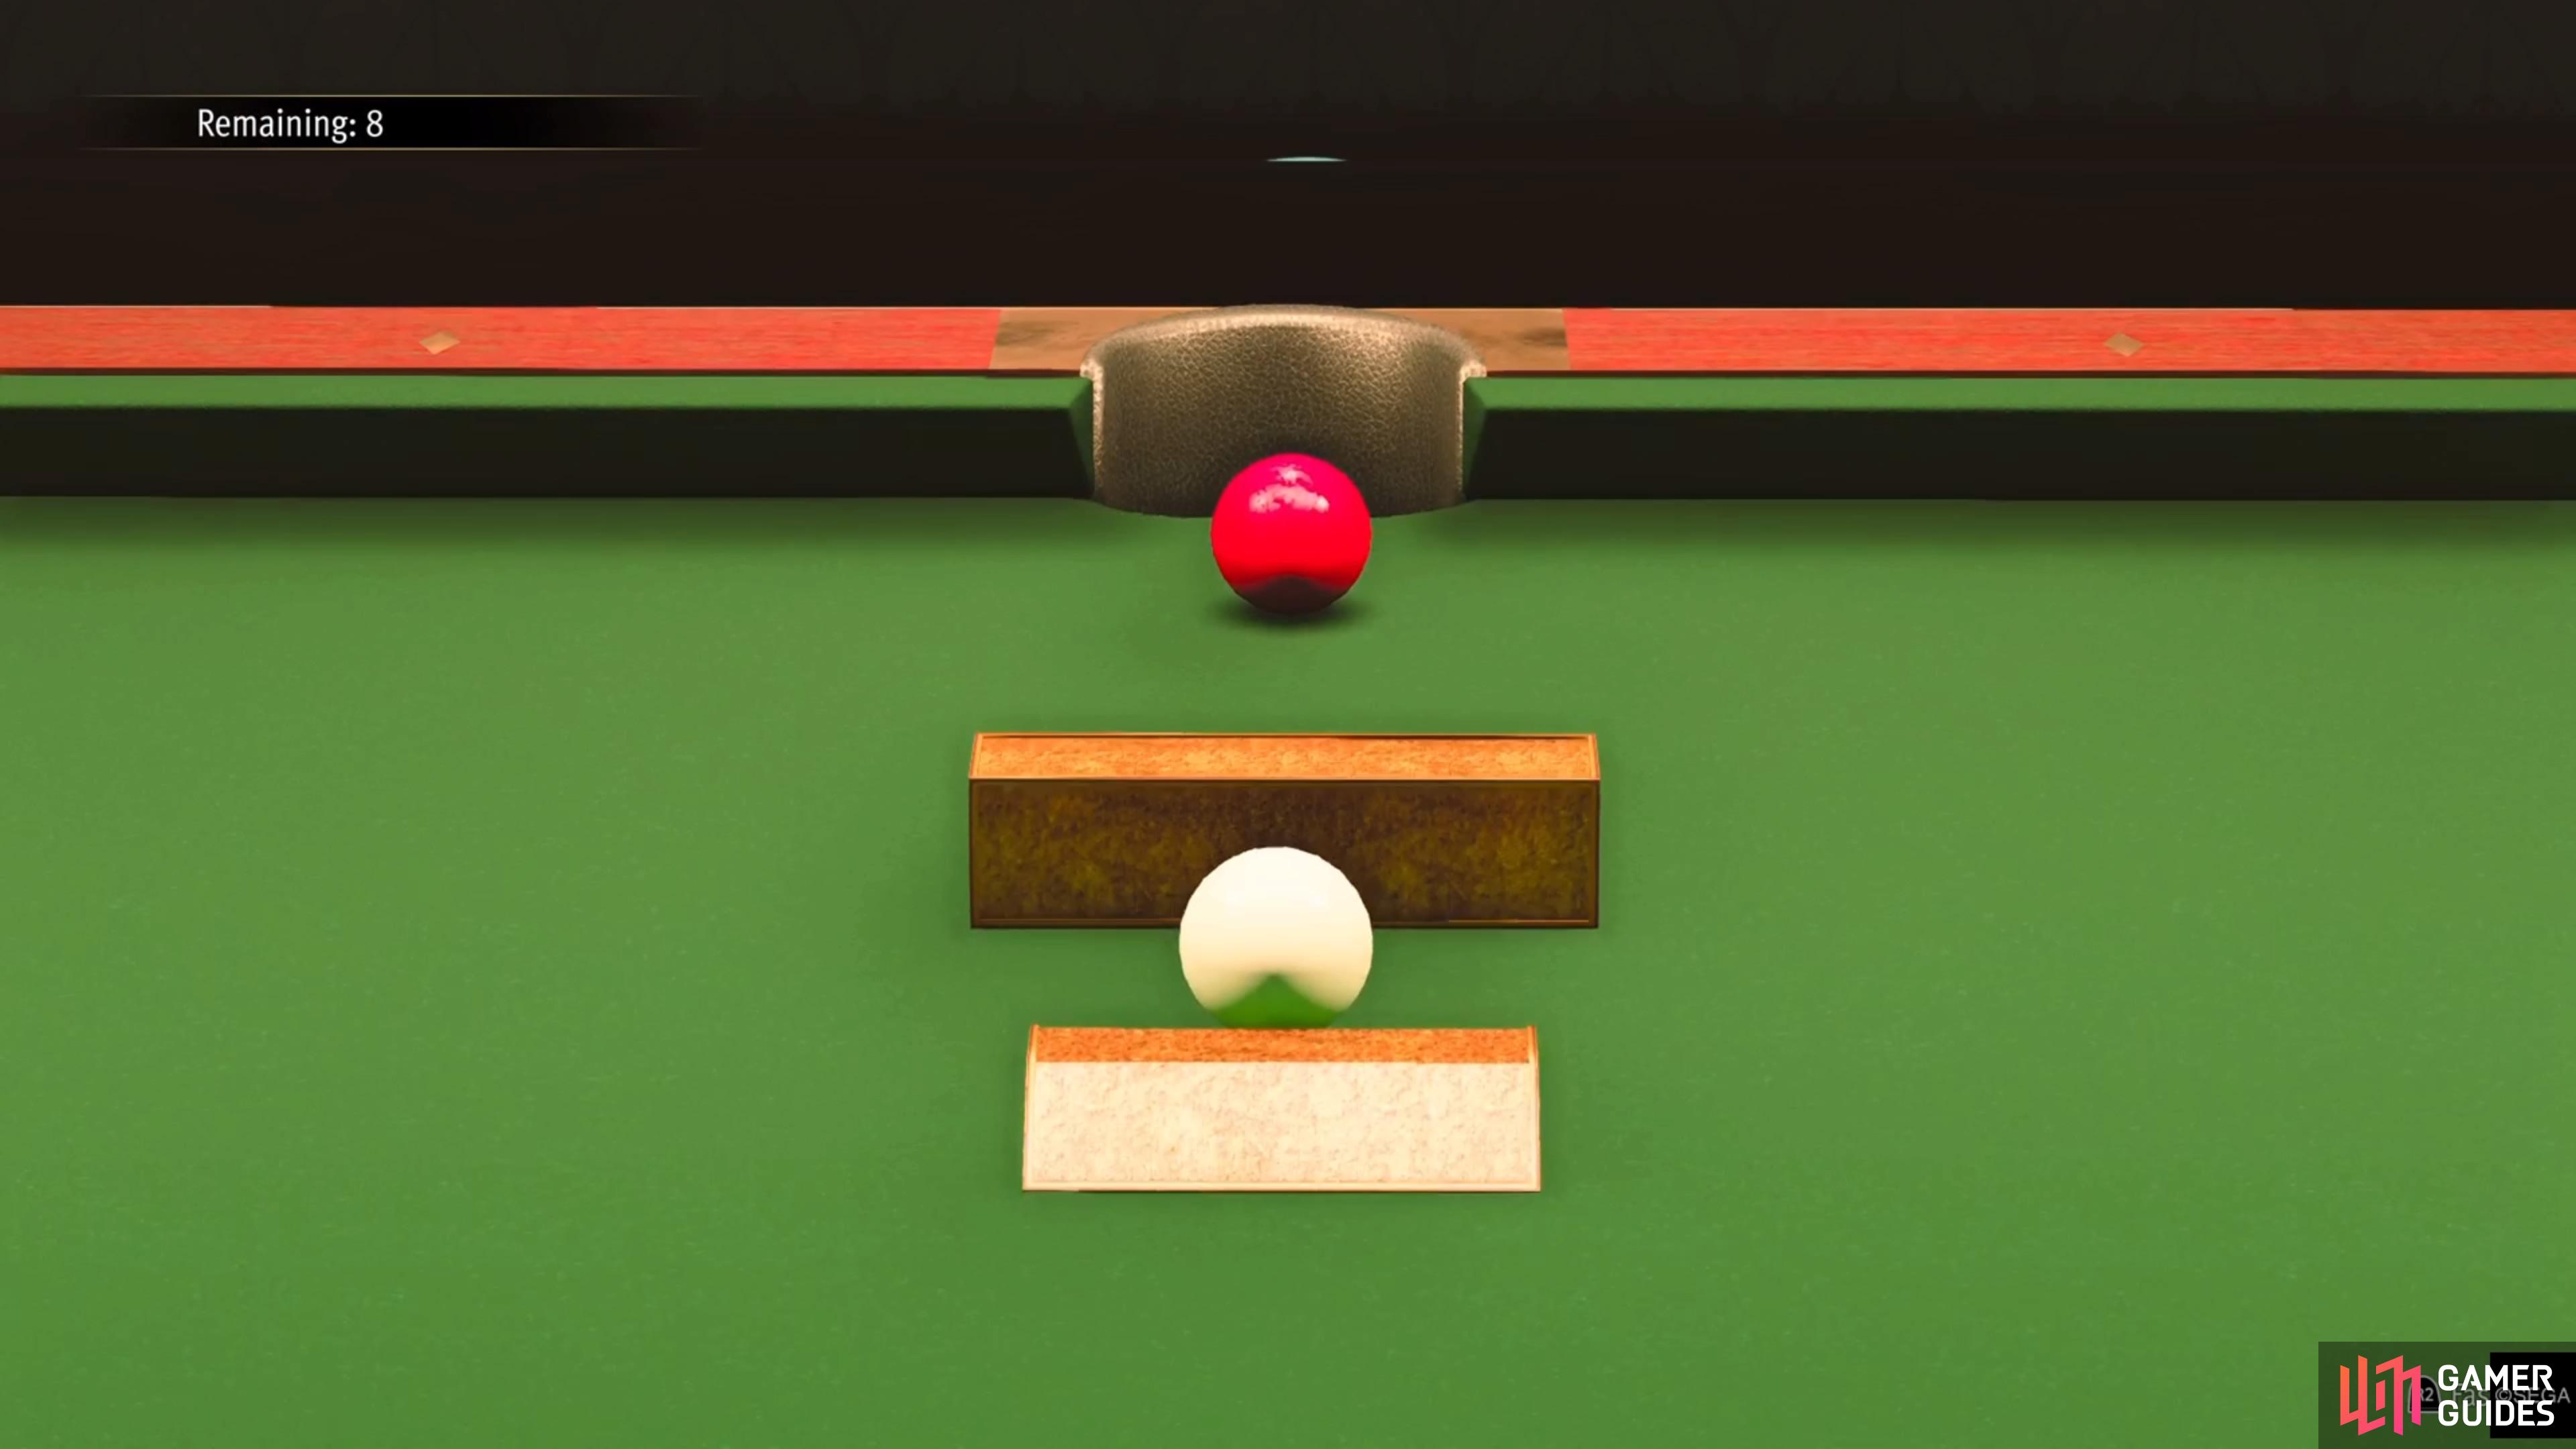 Hitting the cue ball too soft will cause it to barely go over the ramp.